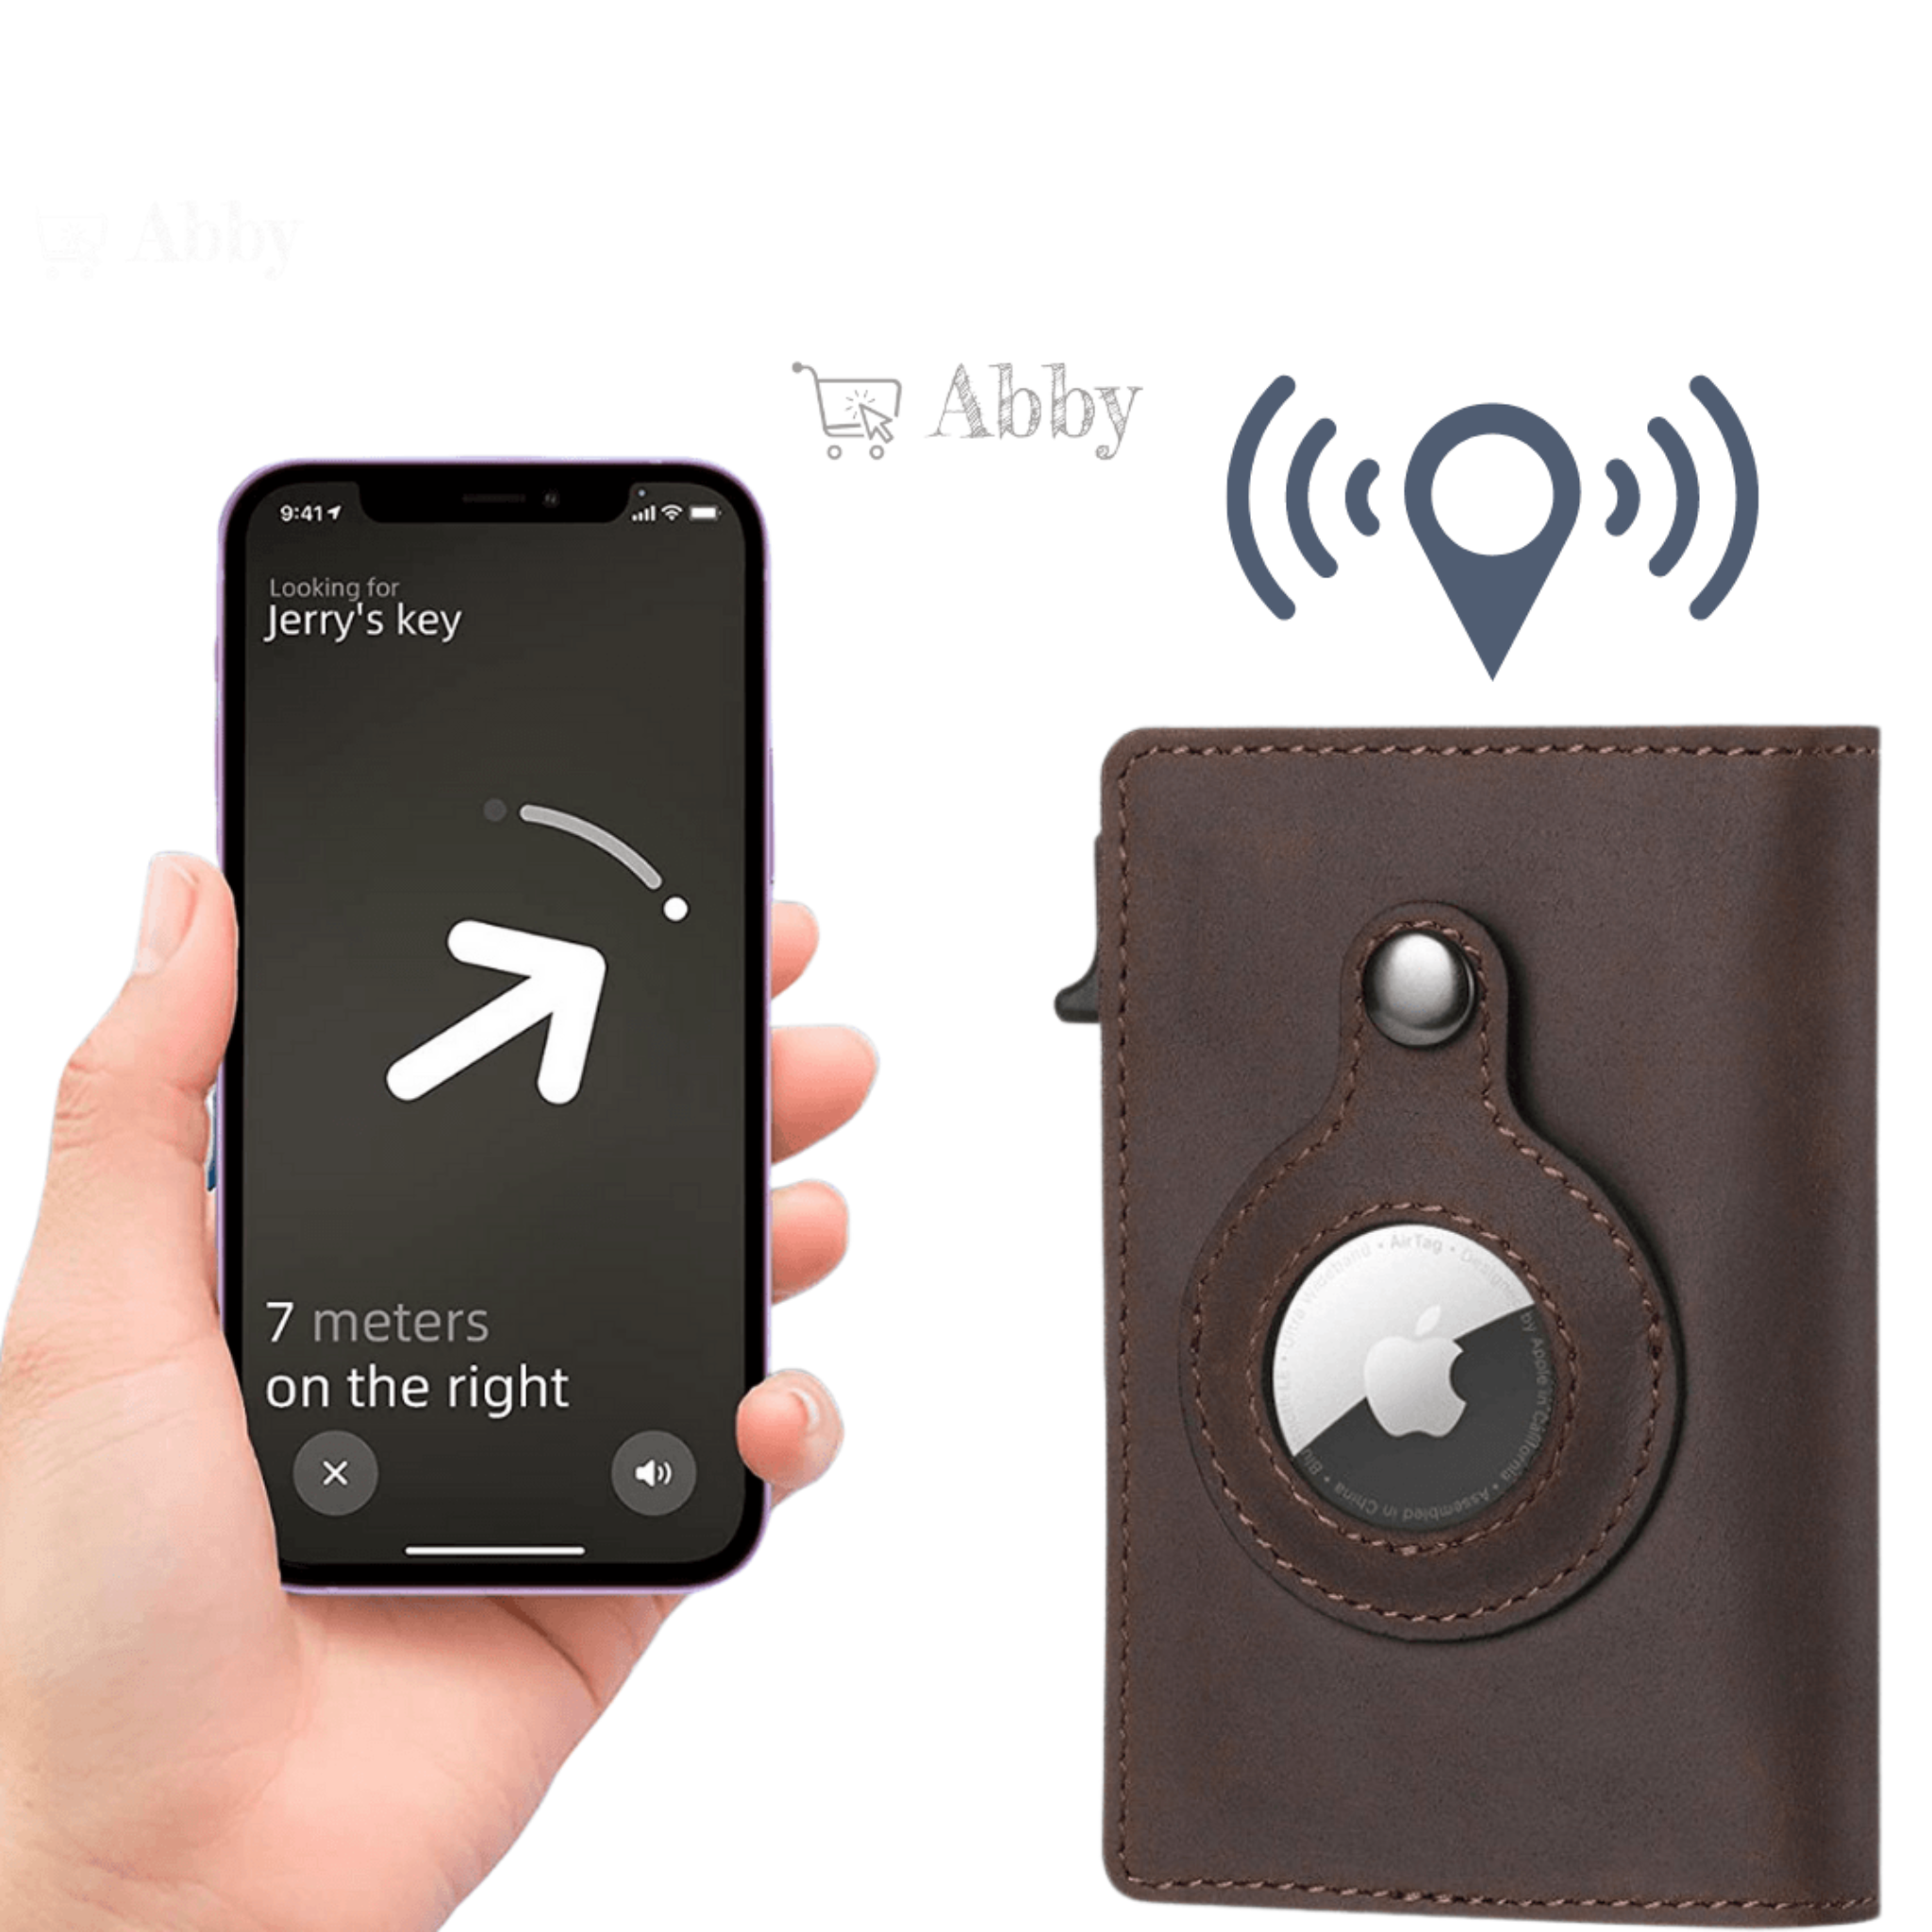 Abby's™ Anti-Lost Slim Wallet with Apple AirTag Case - RFID Protection - Abbycart